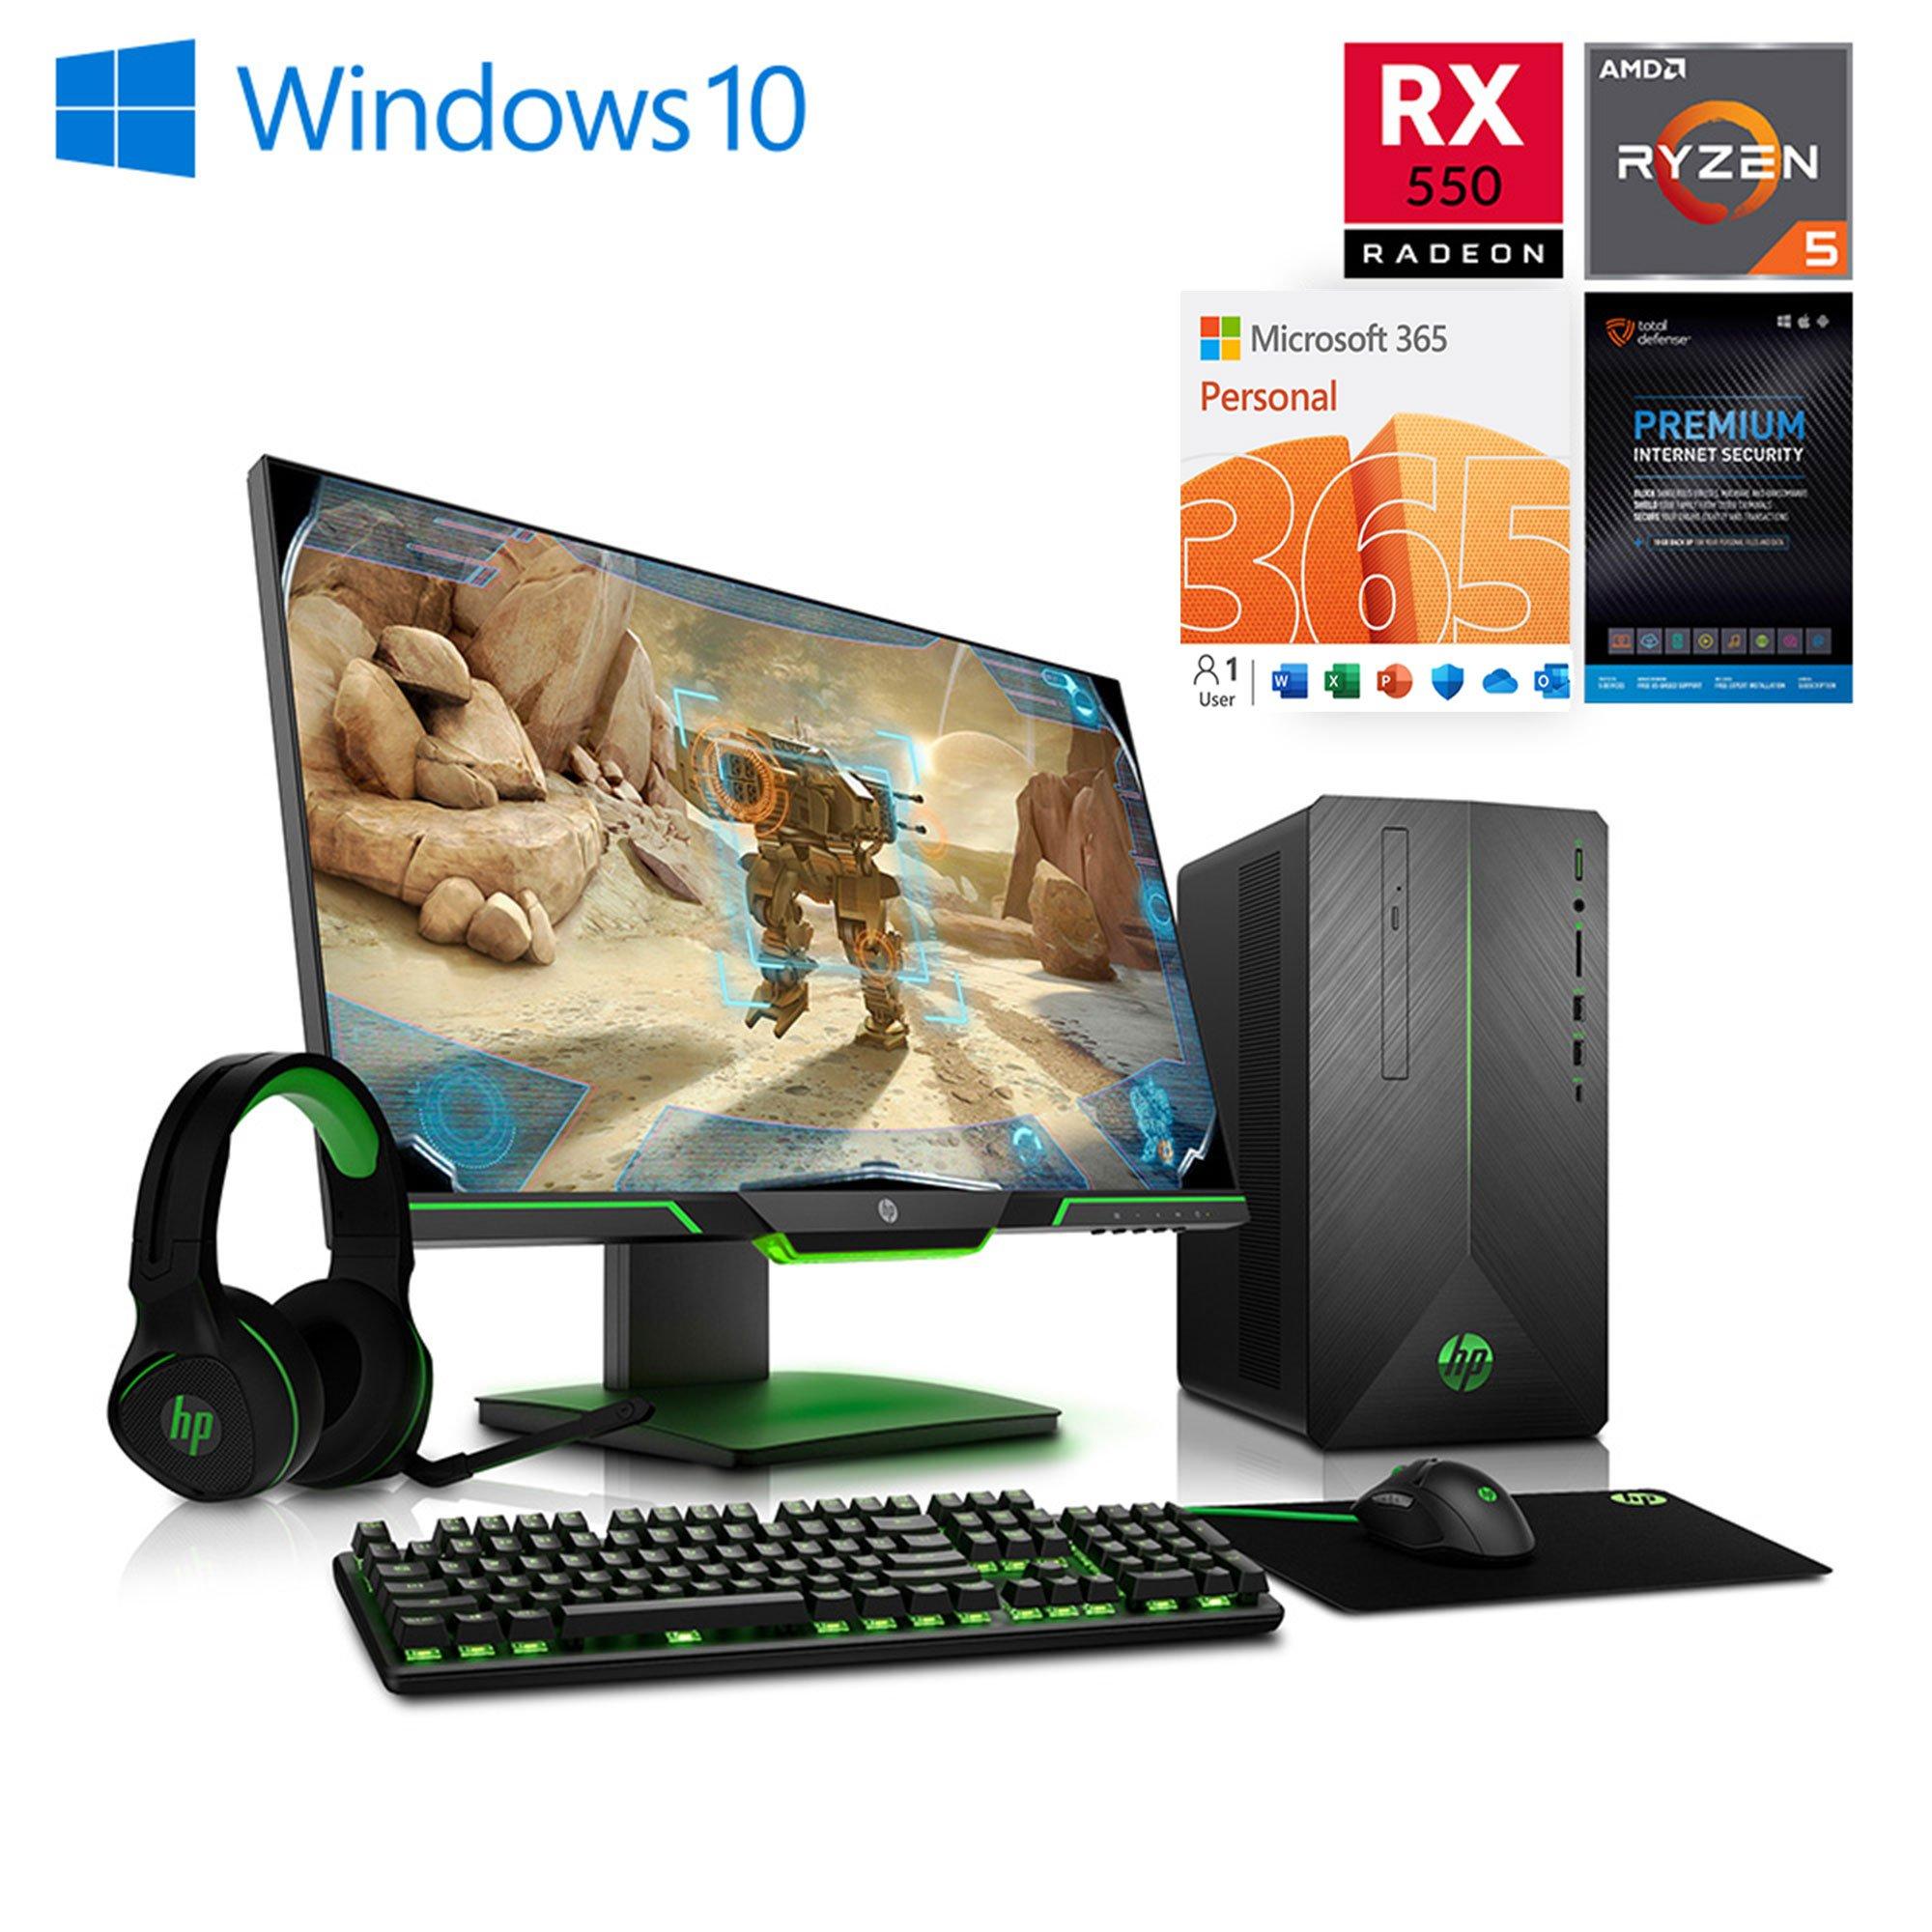 Rent Own HP Pavilion Gaming Desktop Bundle w/ Microsoft Office 365 & Internet Security at Aaron's today!